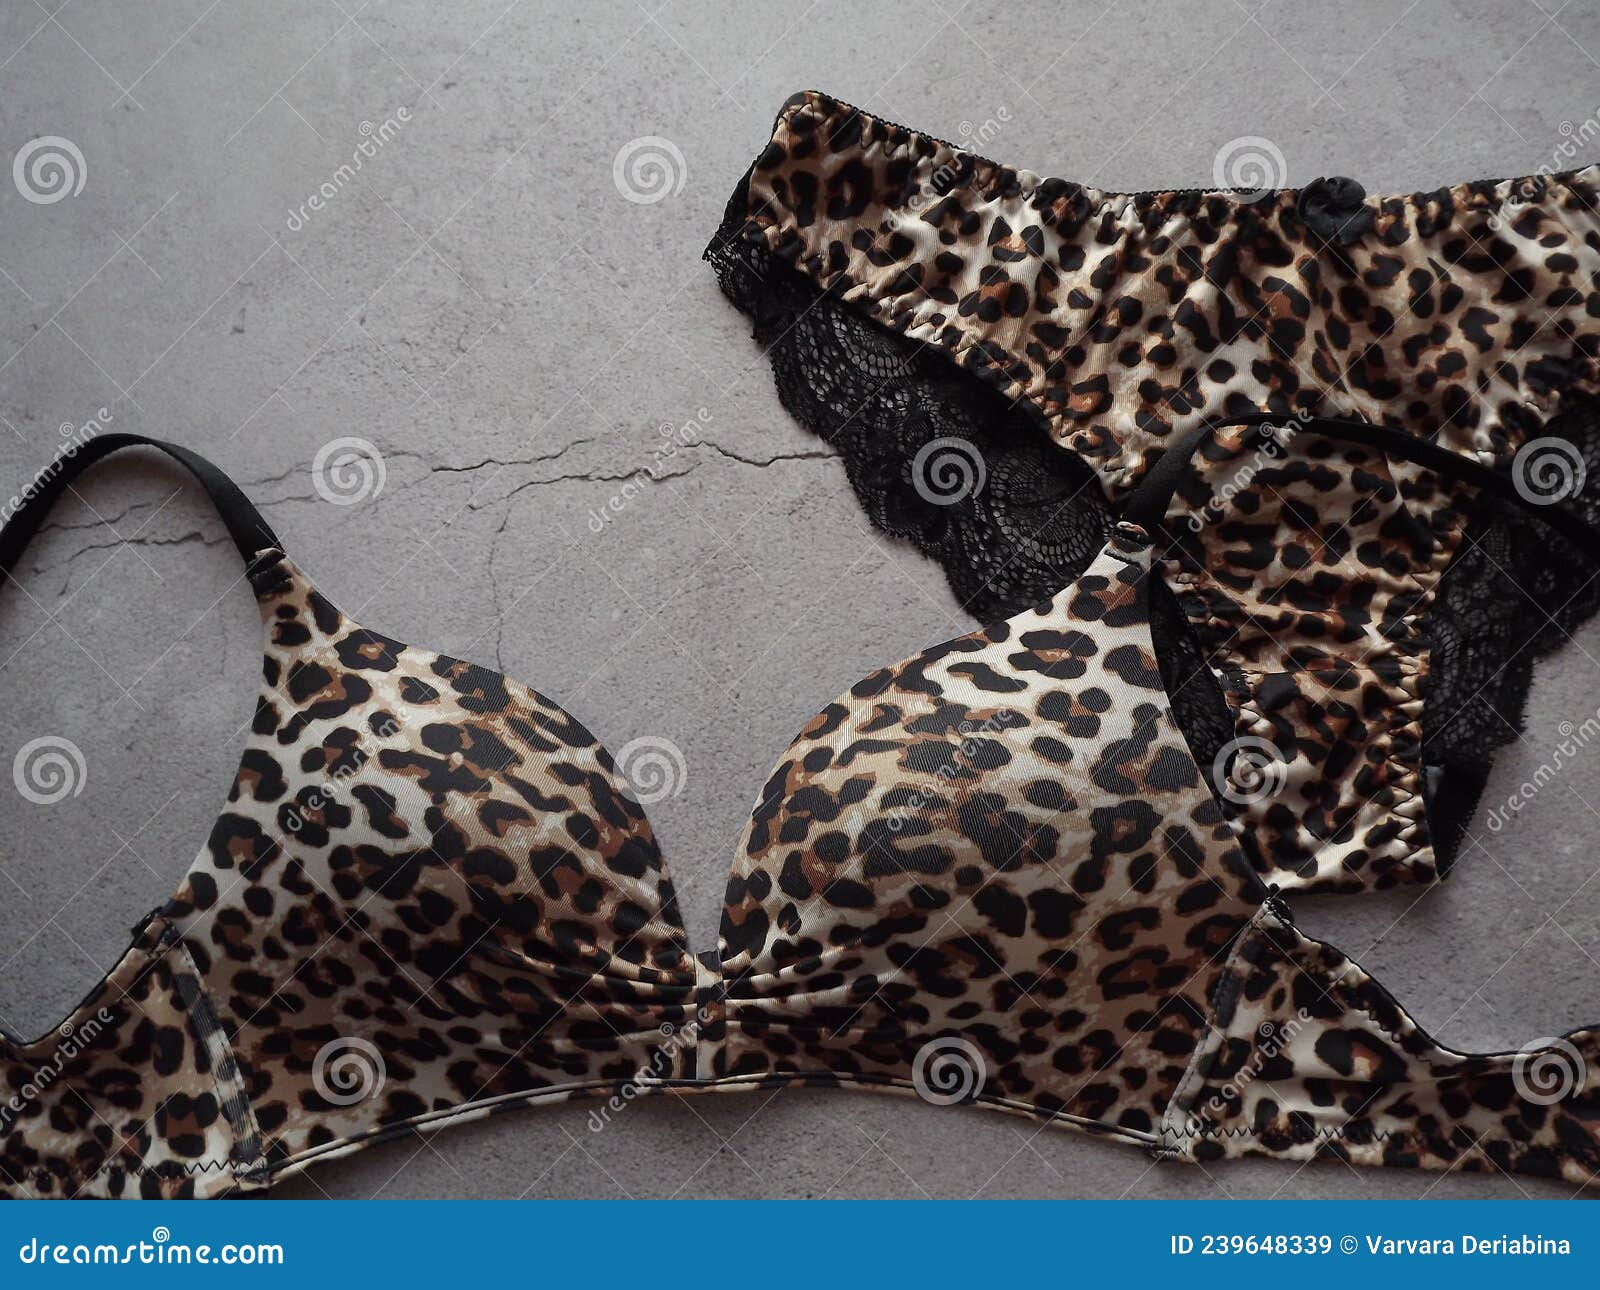 575 Bra Leopard Print Royalty-Free Images, Stock Photos & Pictures